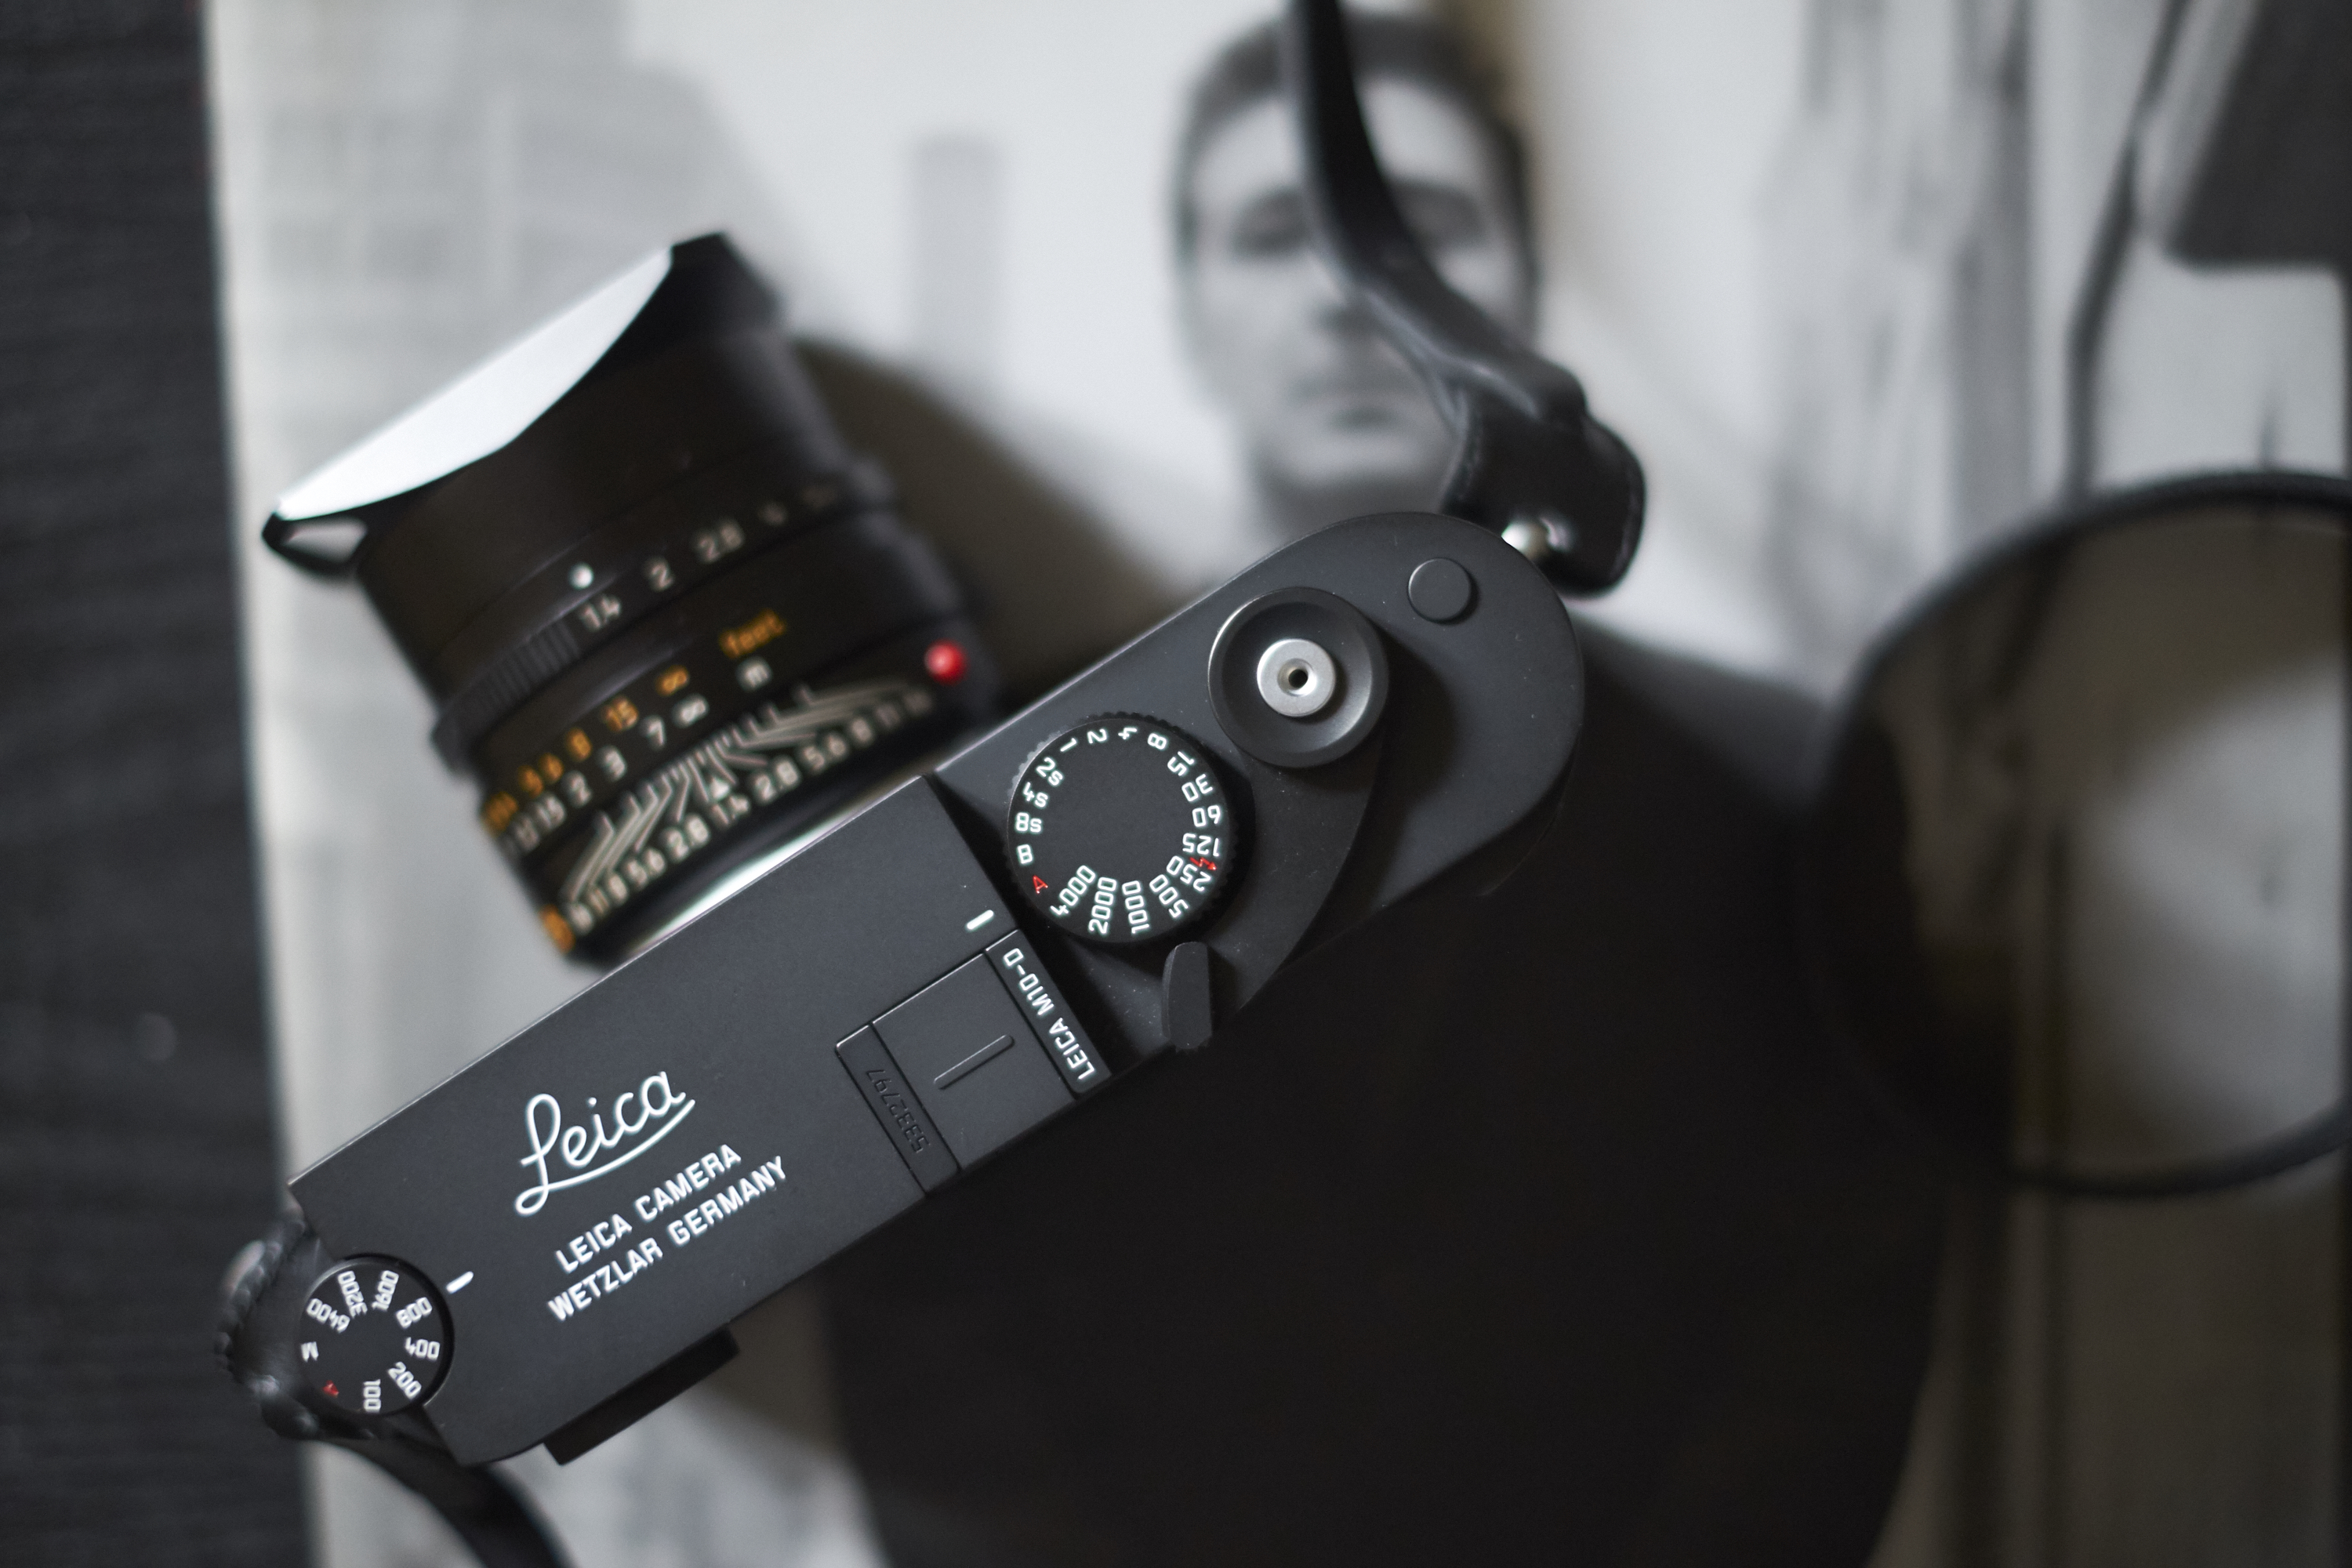 Review: Leica M10-D (Almost the Leica That I've Been Waiting For 